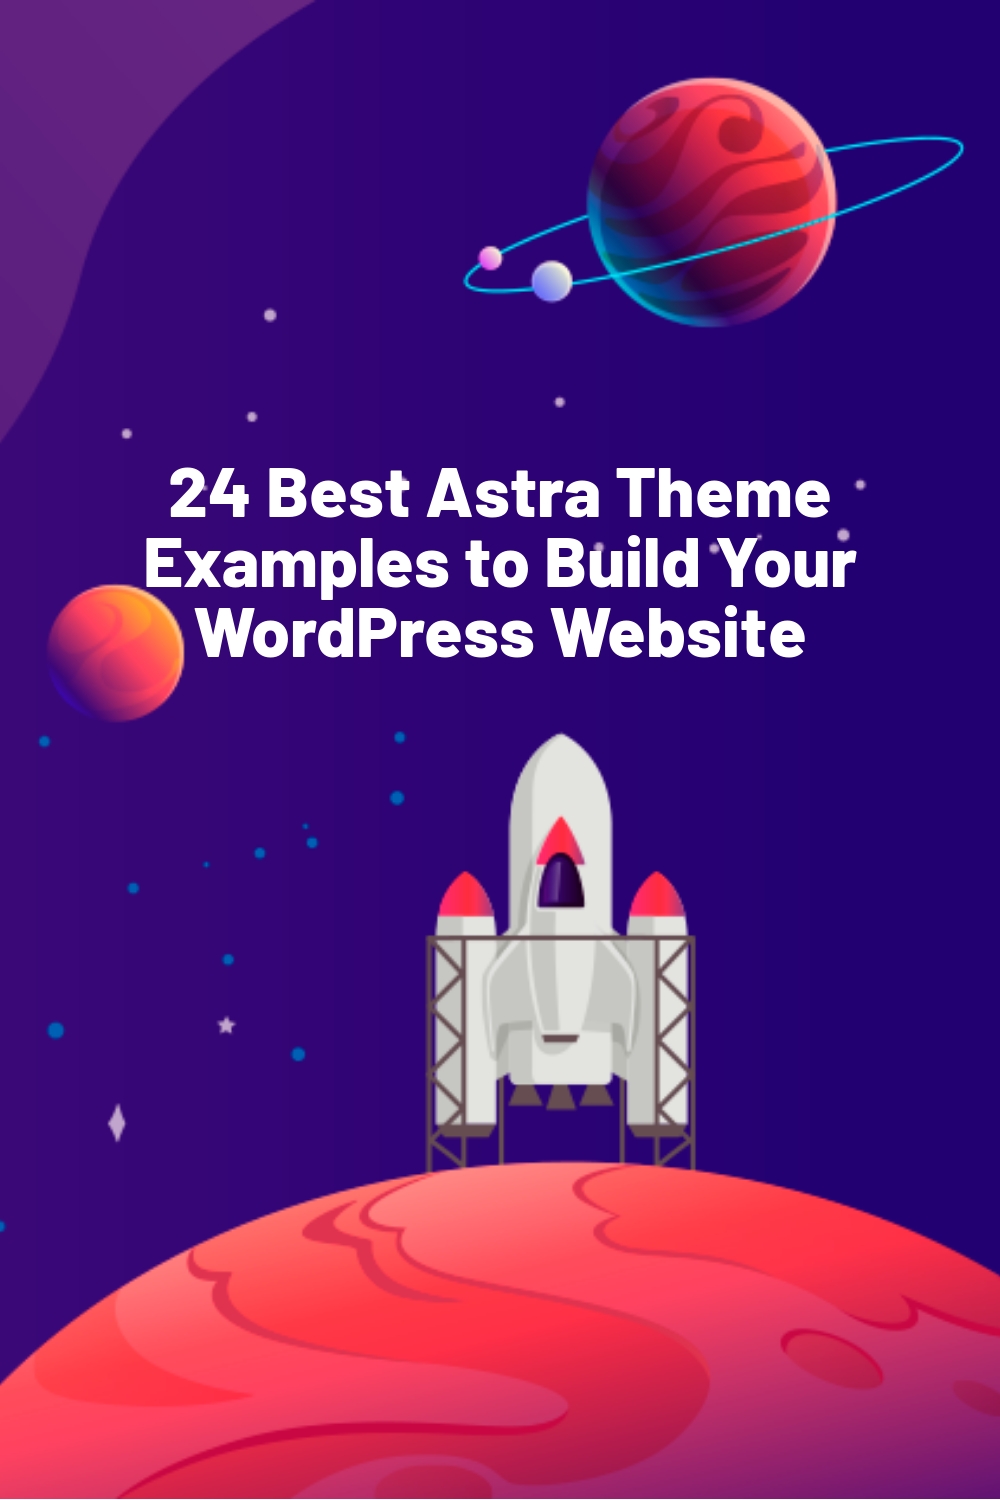 24 Best Astra Theme Examples to Build Your WordPress Website